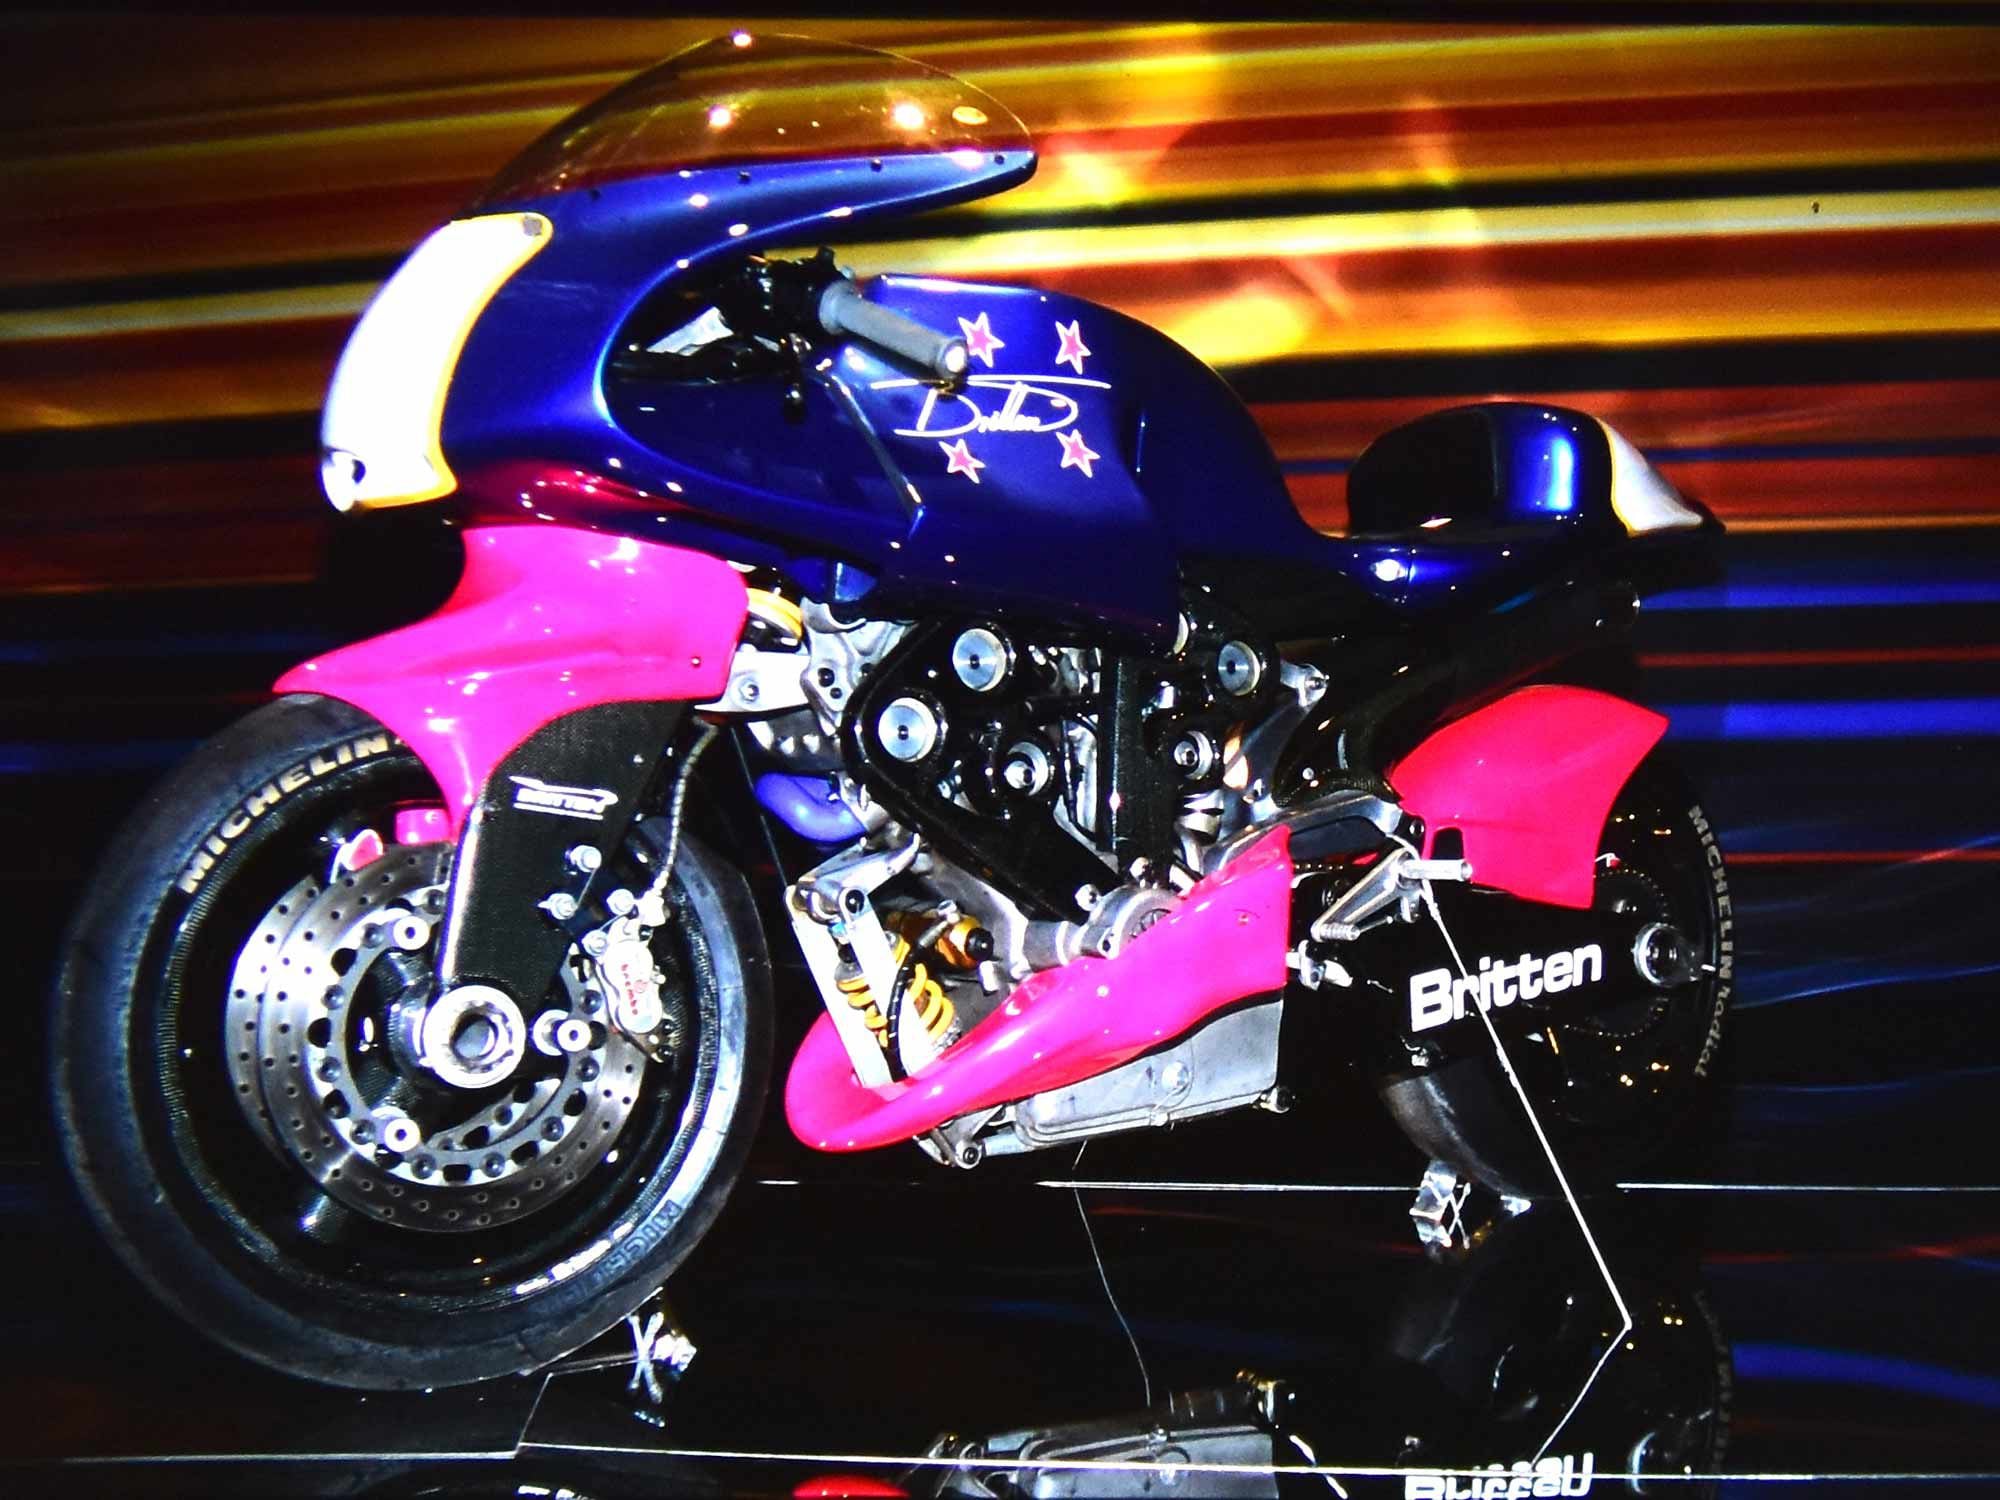 This is Britten No. 5 (serial No. P002) on display at “The Art of the Motorcycle” at the Guggenheim in Las Vegas, in the early ’90s.